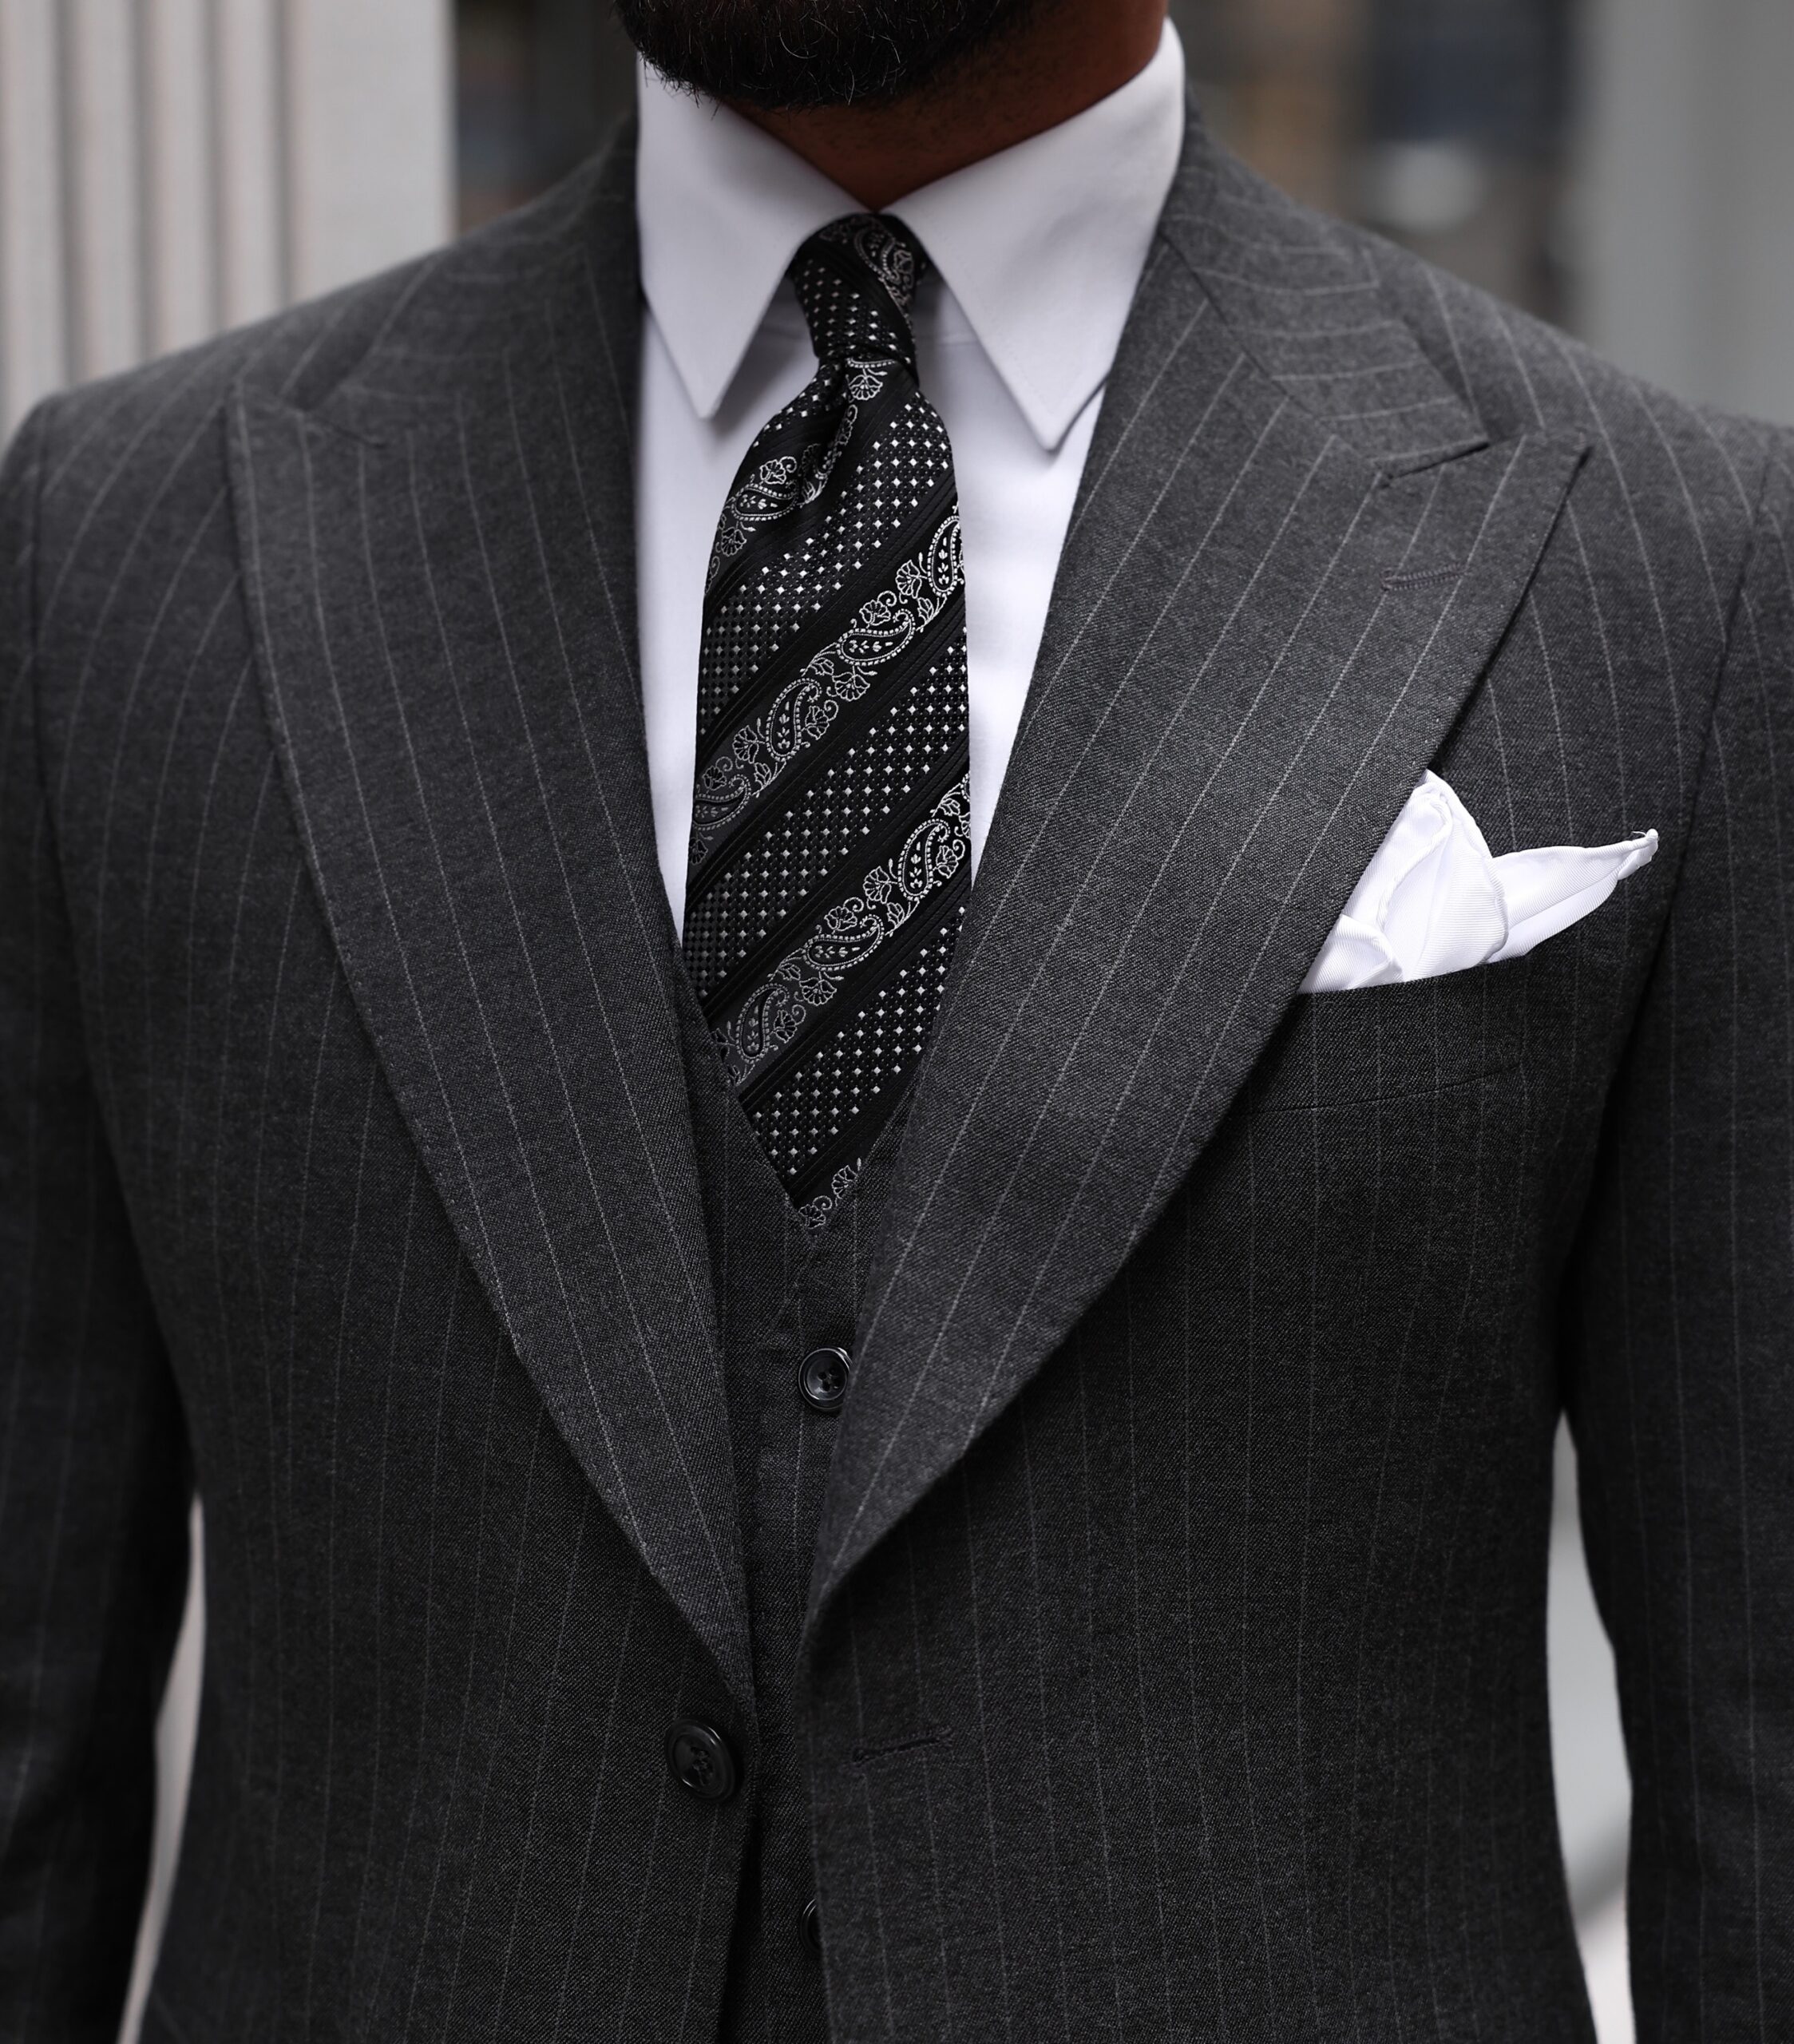 The Striped Suit — De Oost Bespoke Tailoring - Bespoke Tailoring Guide:  Custom Suits, Wedding Suits, Fabrics, Tailoring & Maintenance Tips